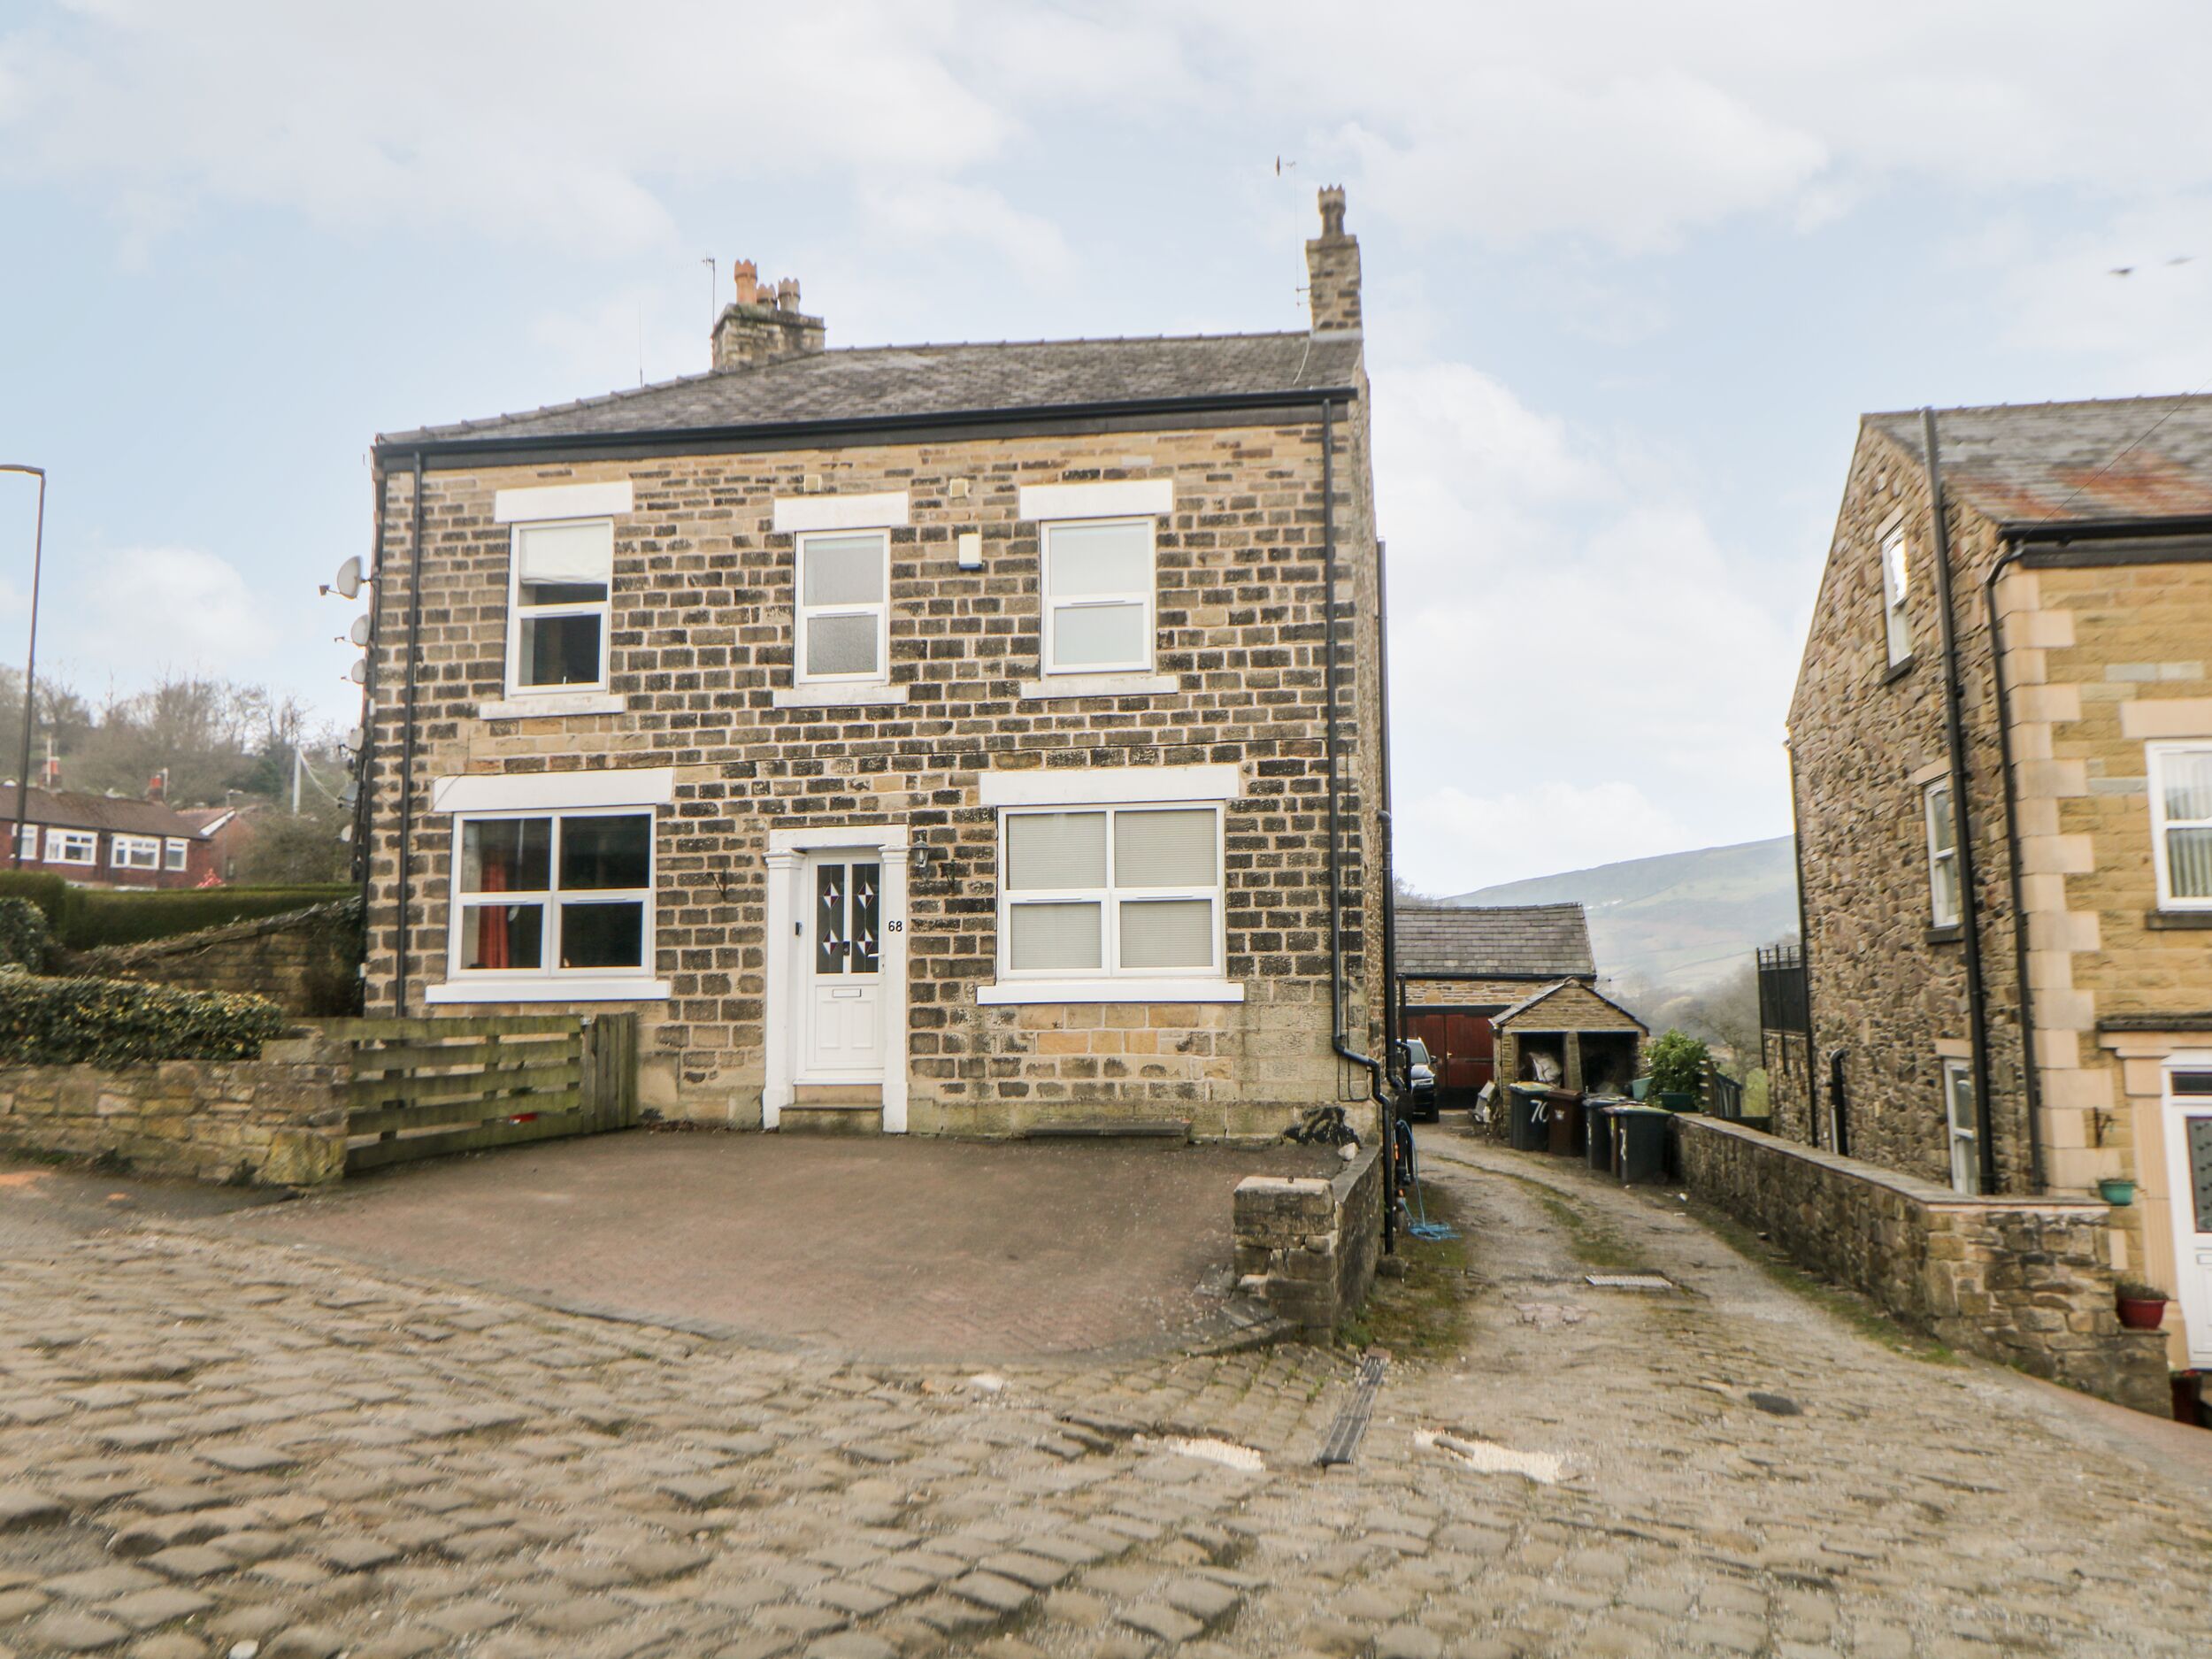 4 bedroom Cottage for rent in Buxton